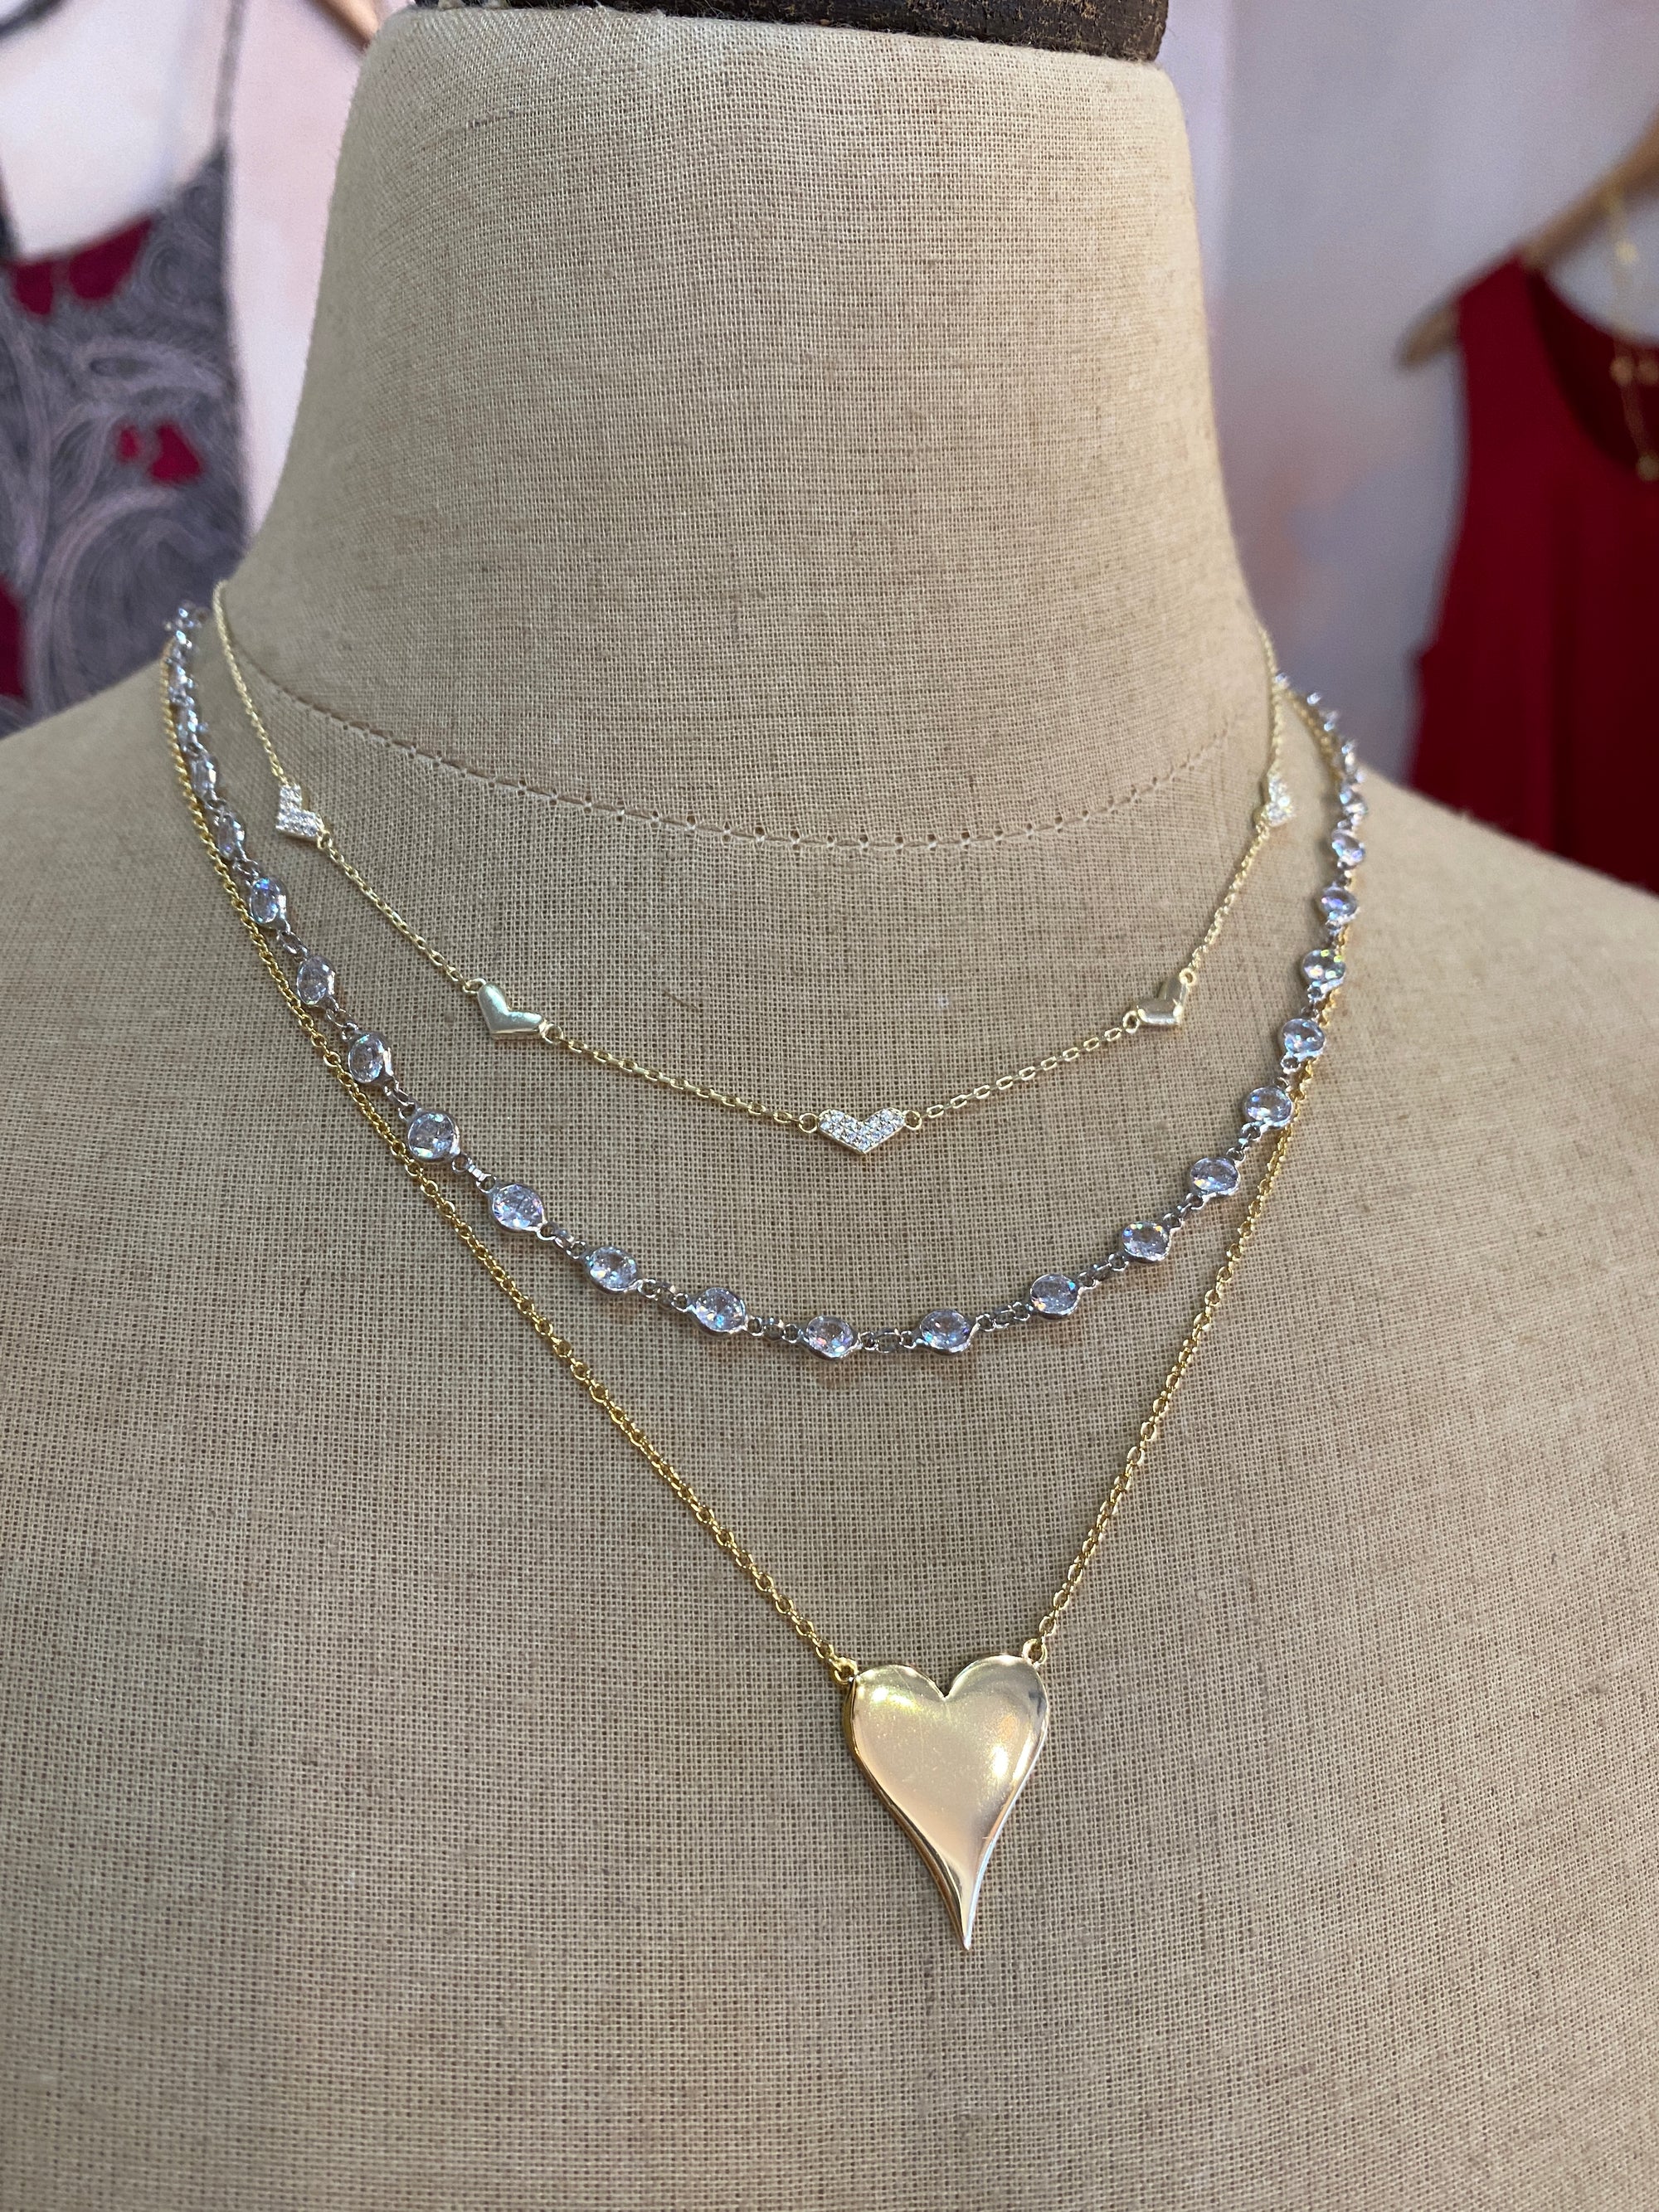 Diamonds by the Yard Necklace